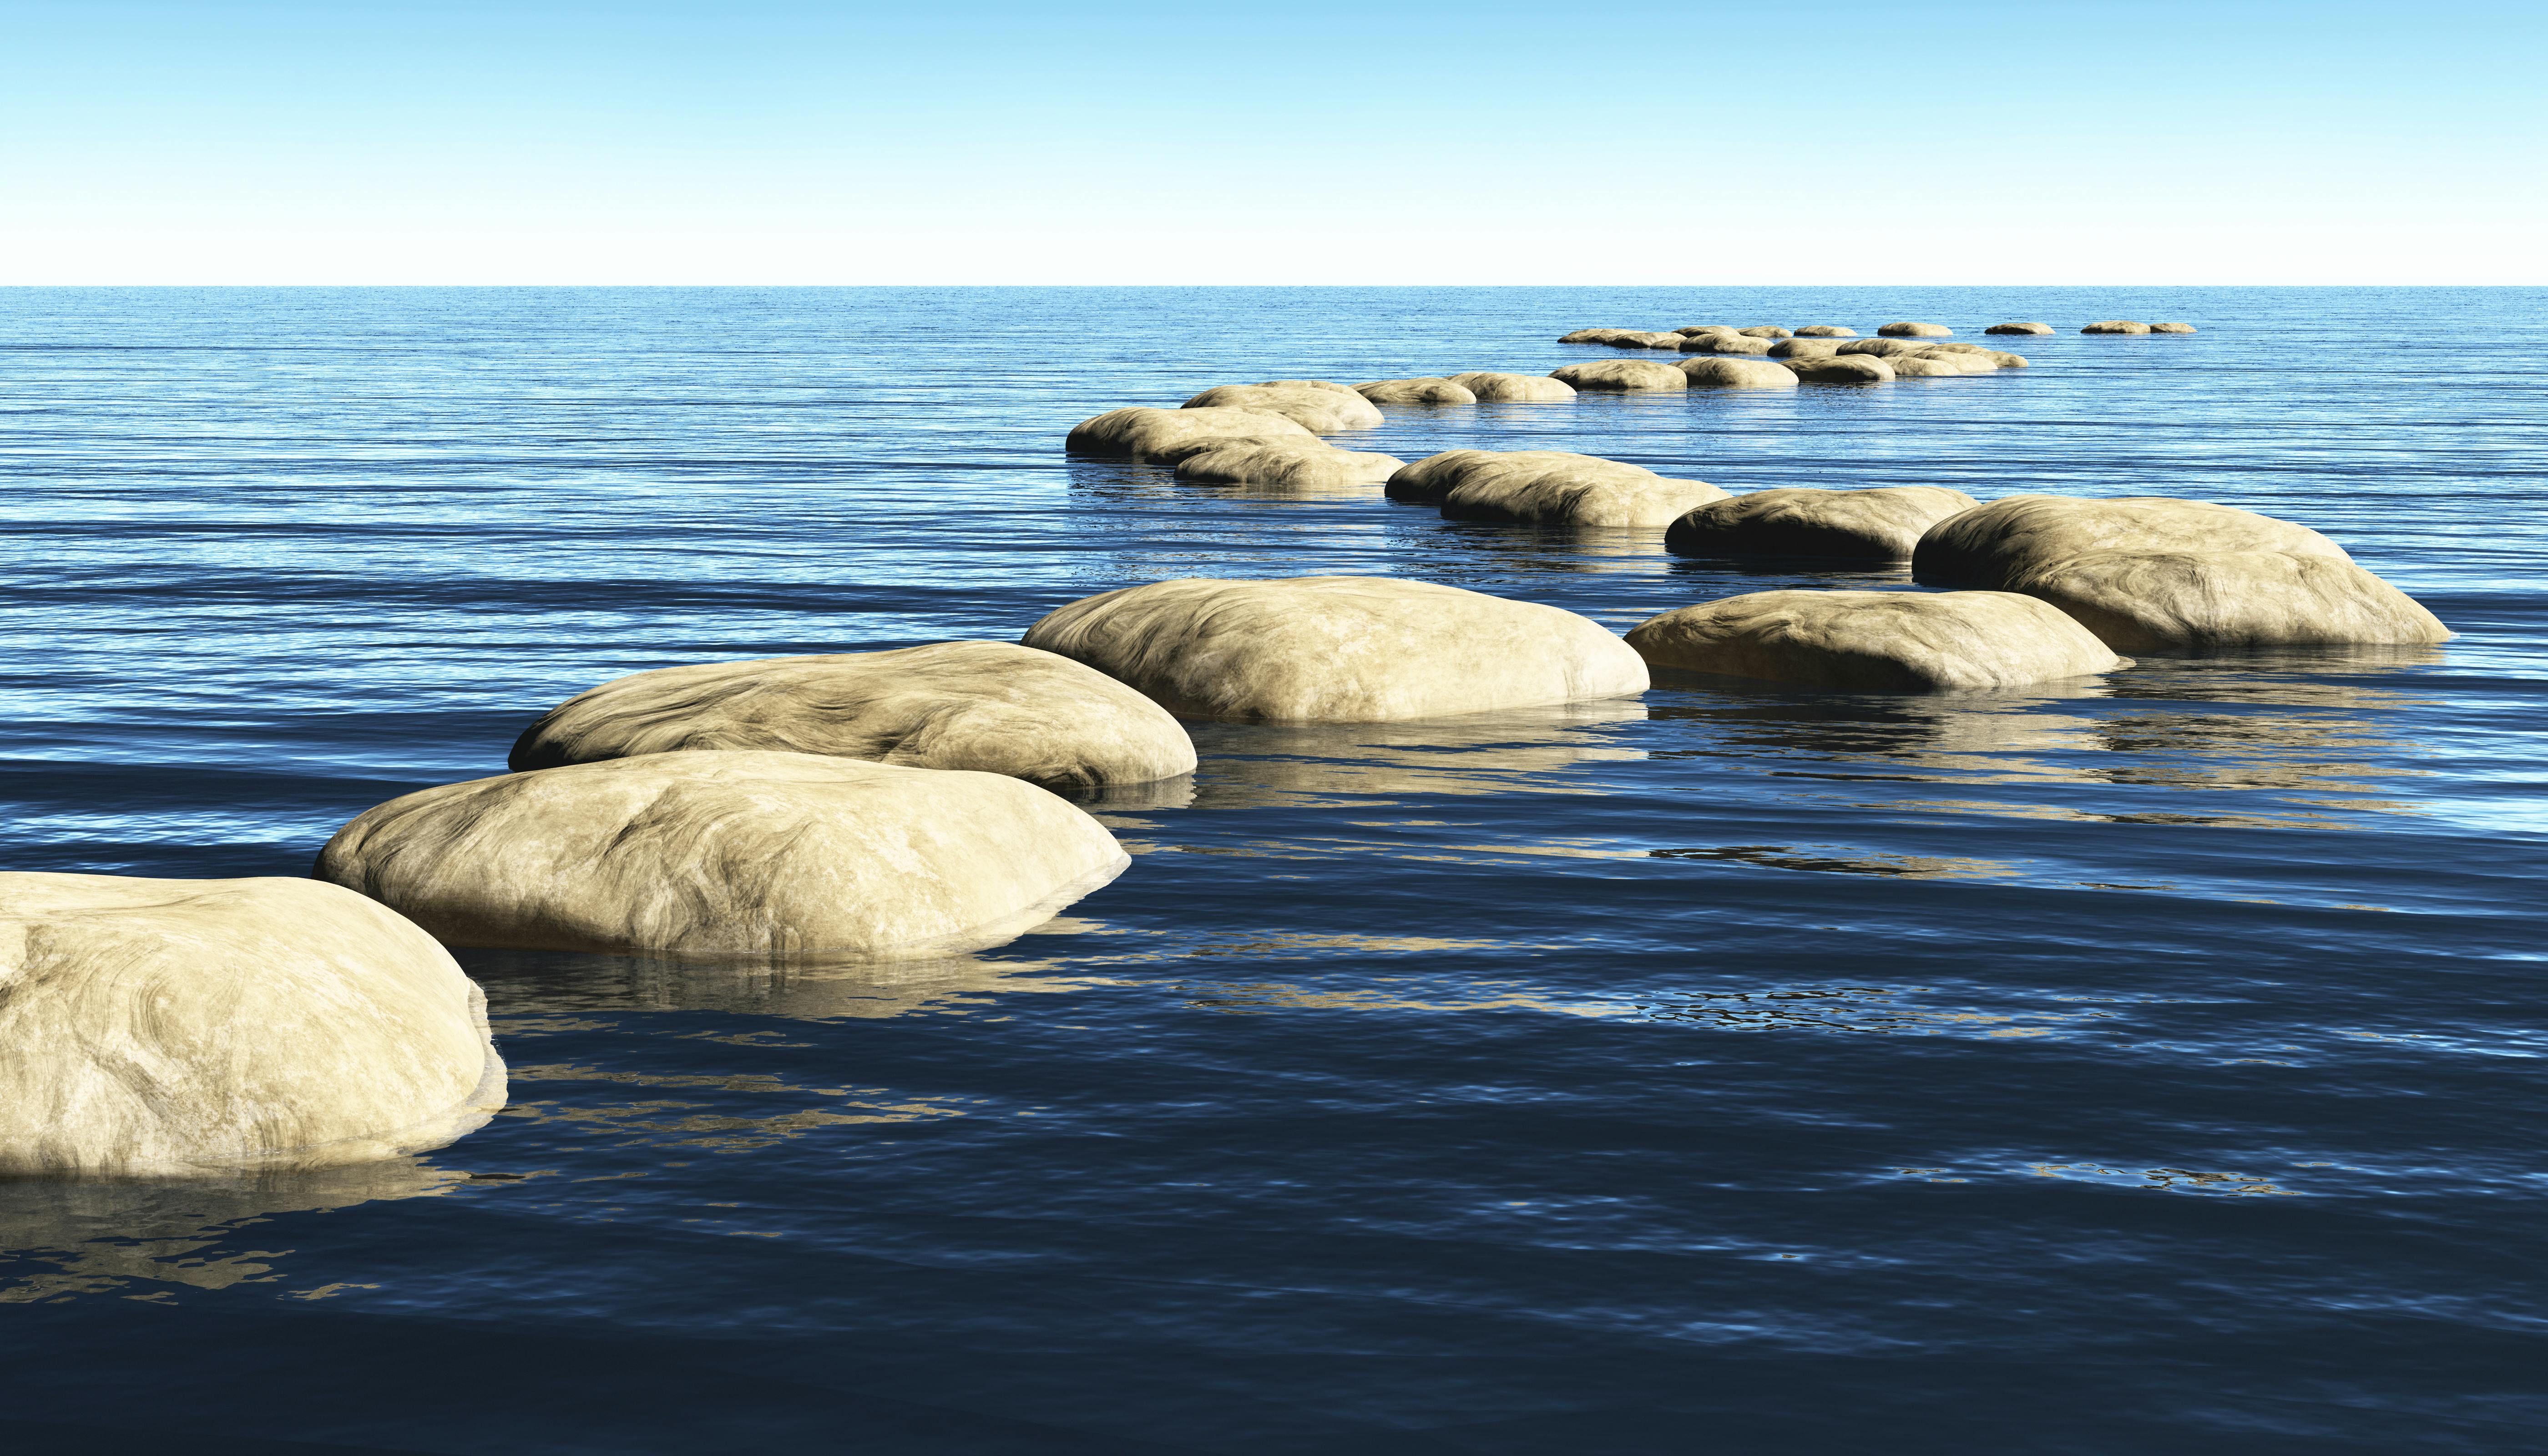 Stepping stones that lead to an unknown destination